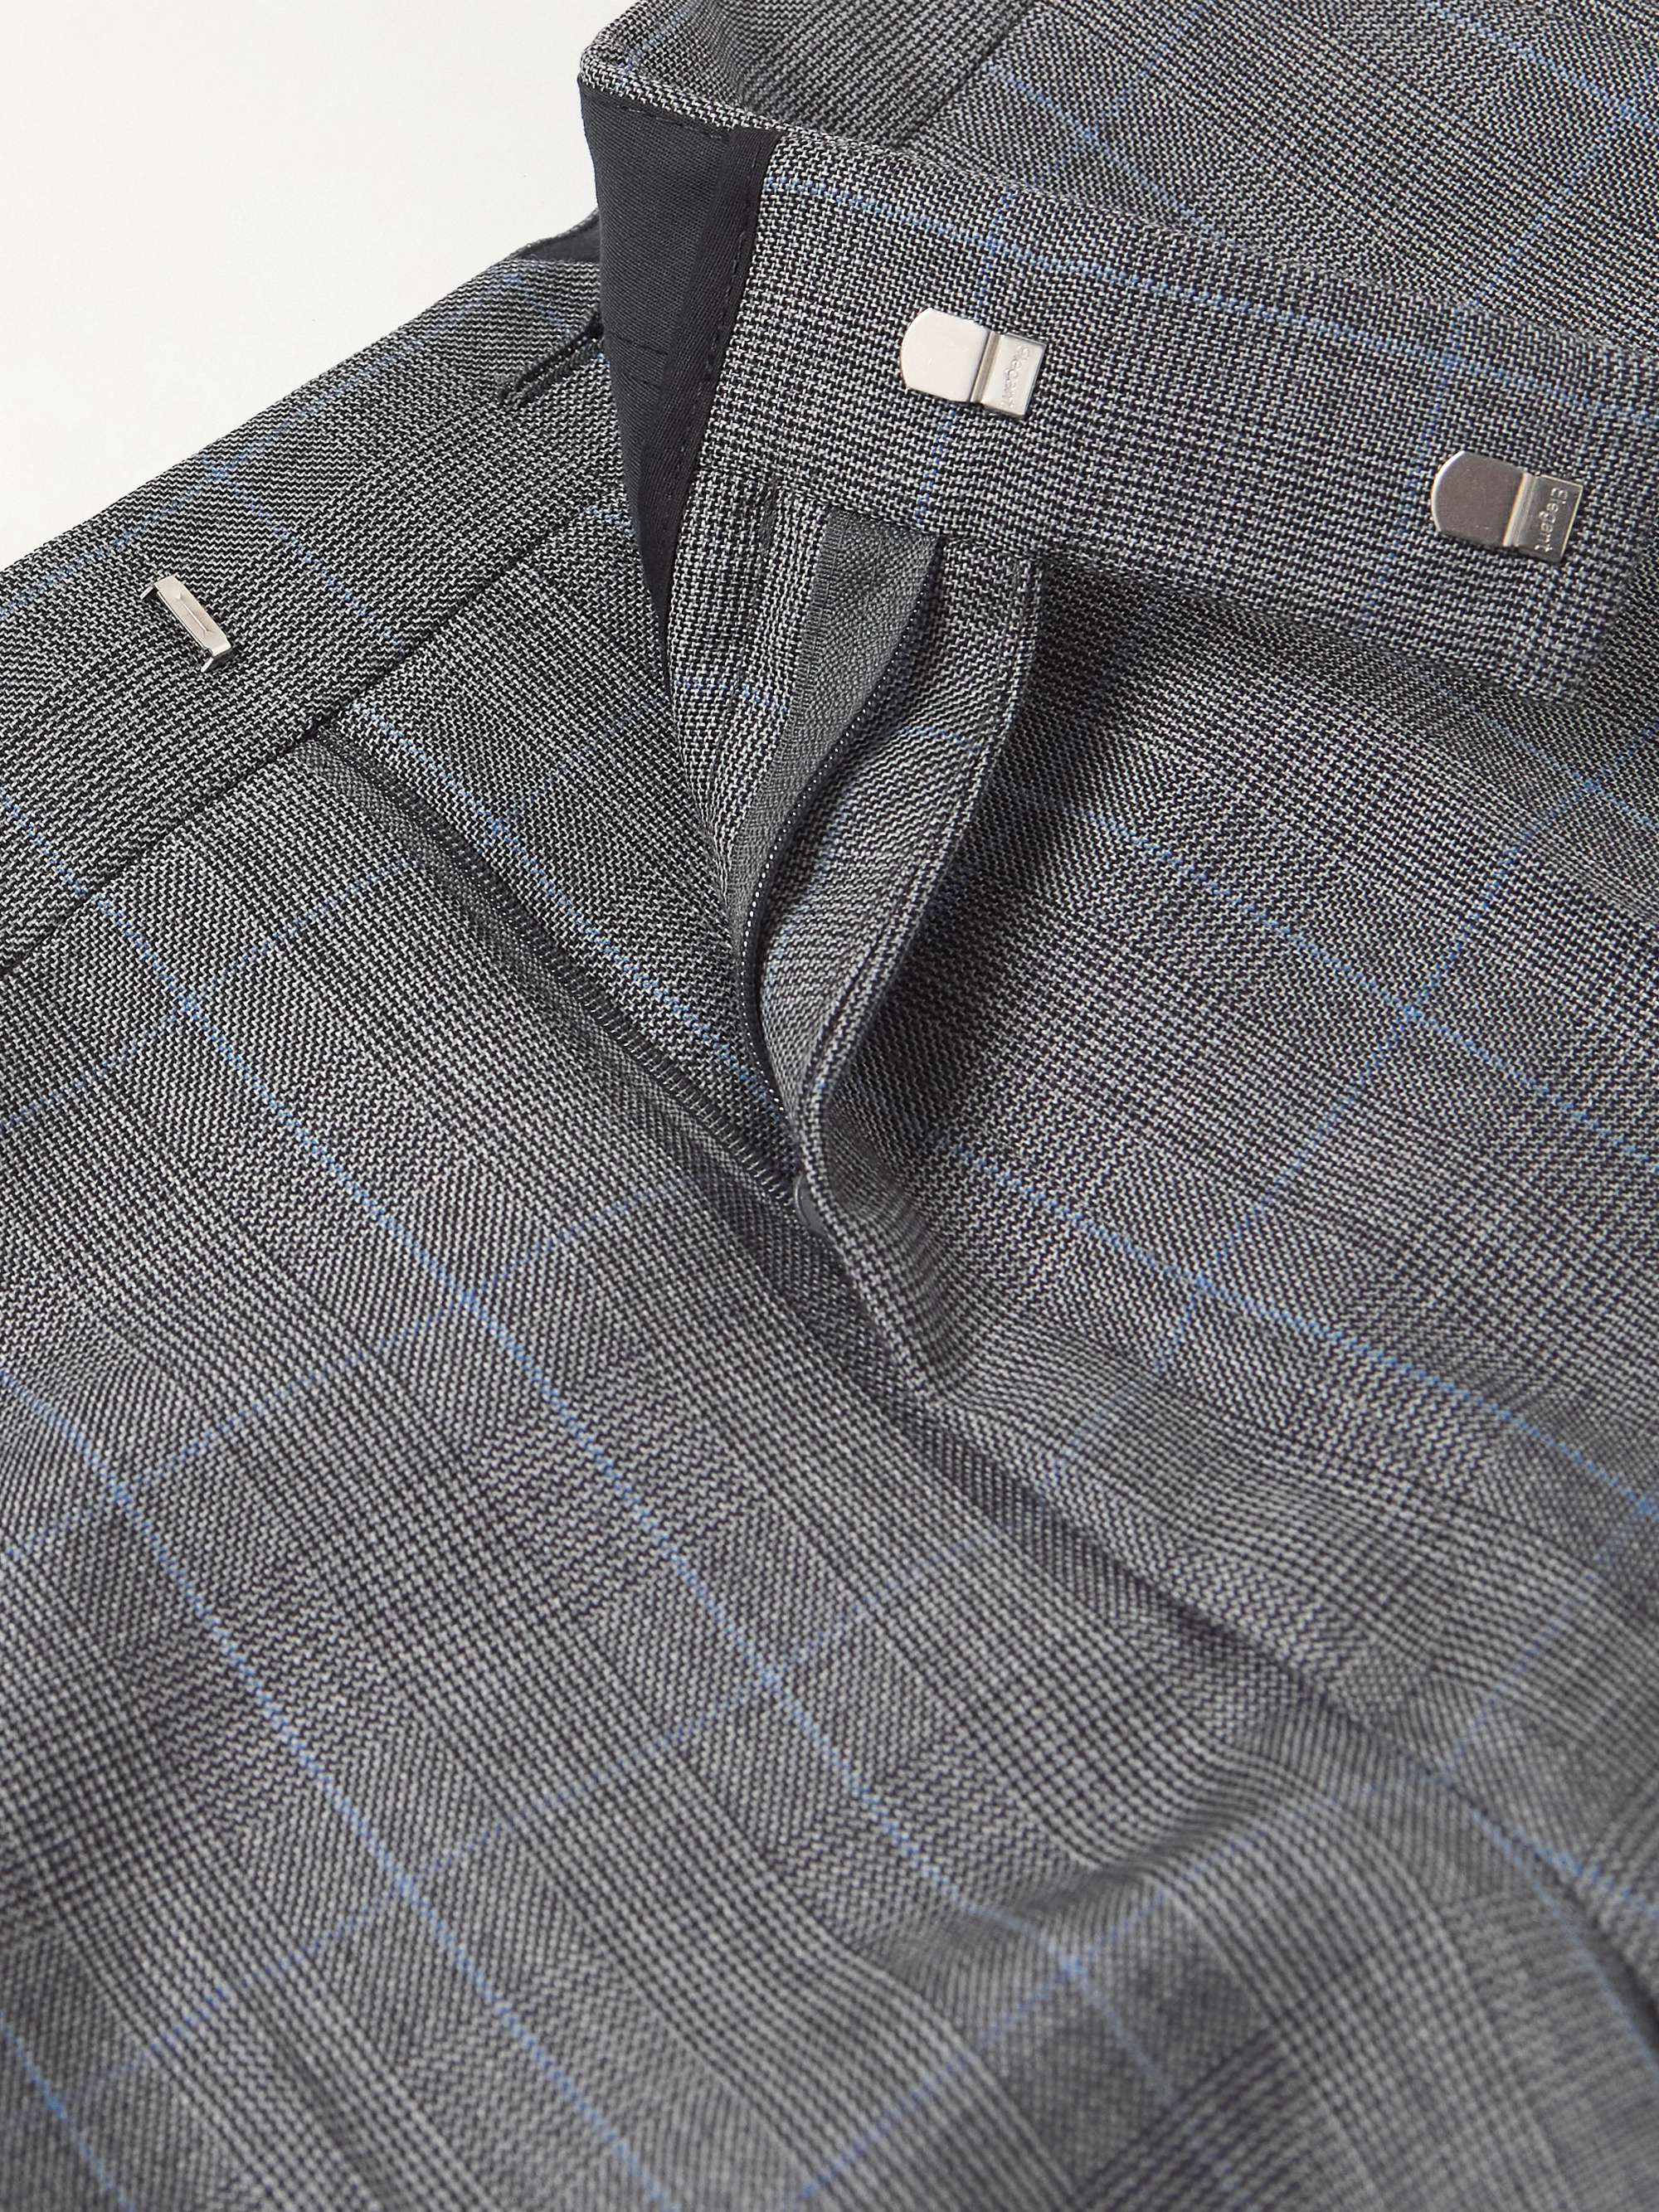 KINGSMAN Straight-Leg Prince Of Wales Checked Wool Suit Trousers